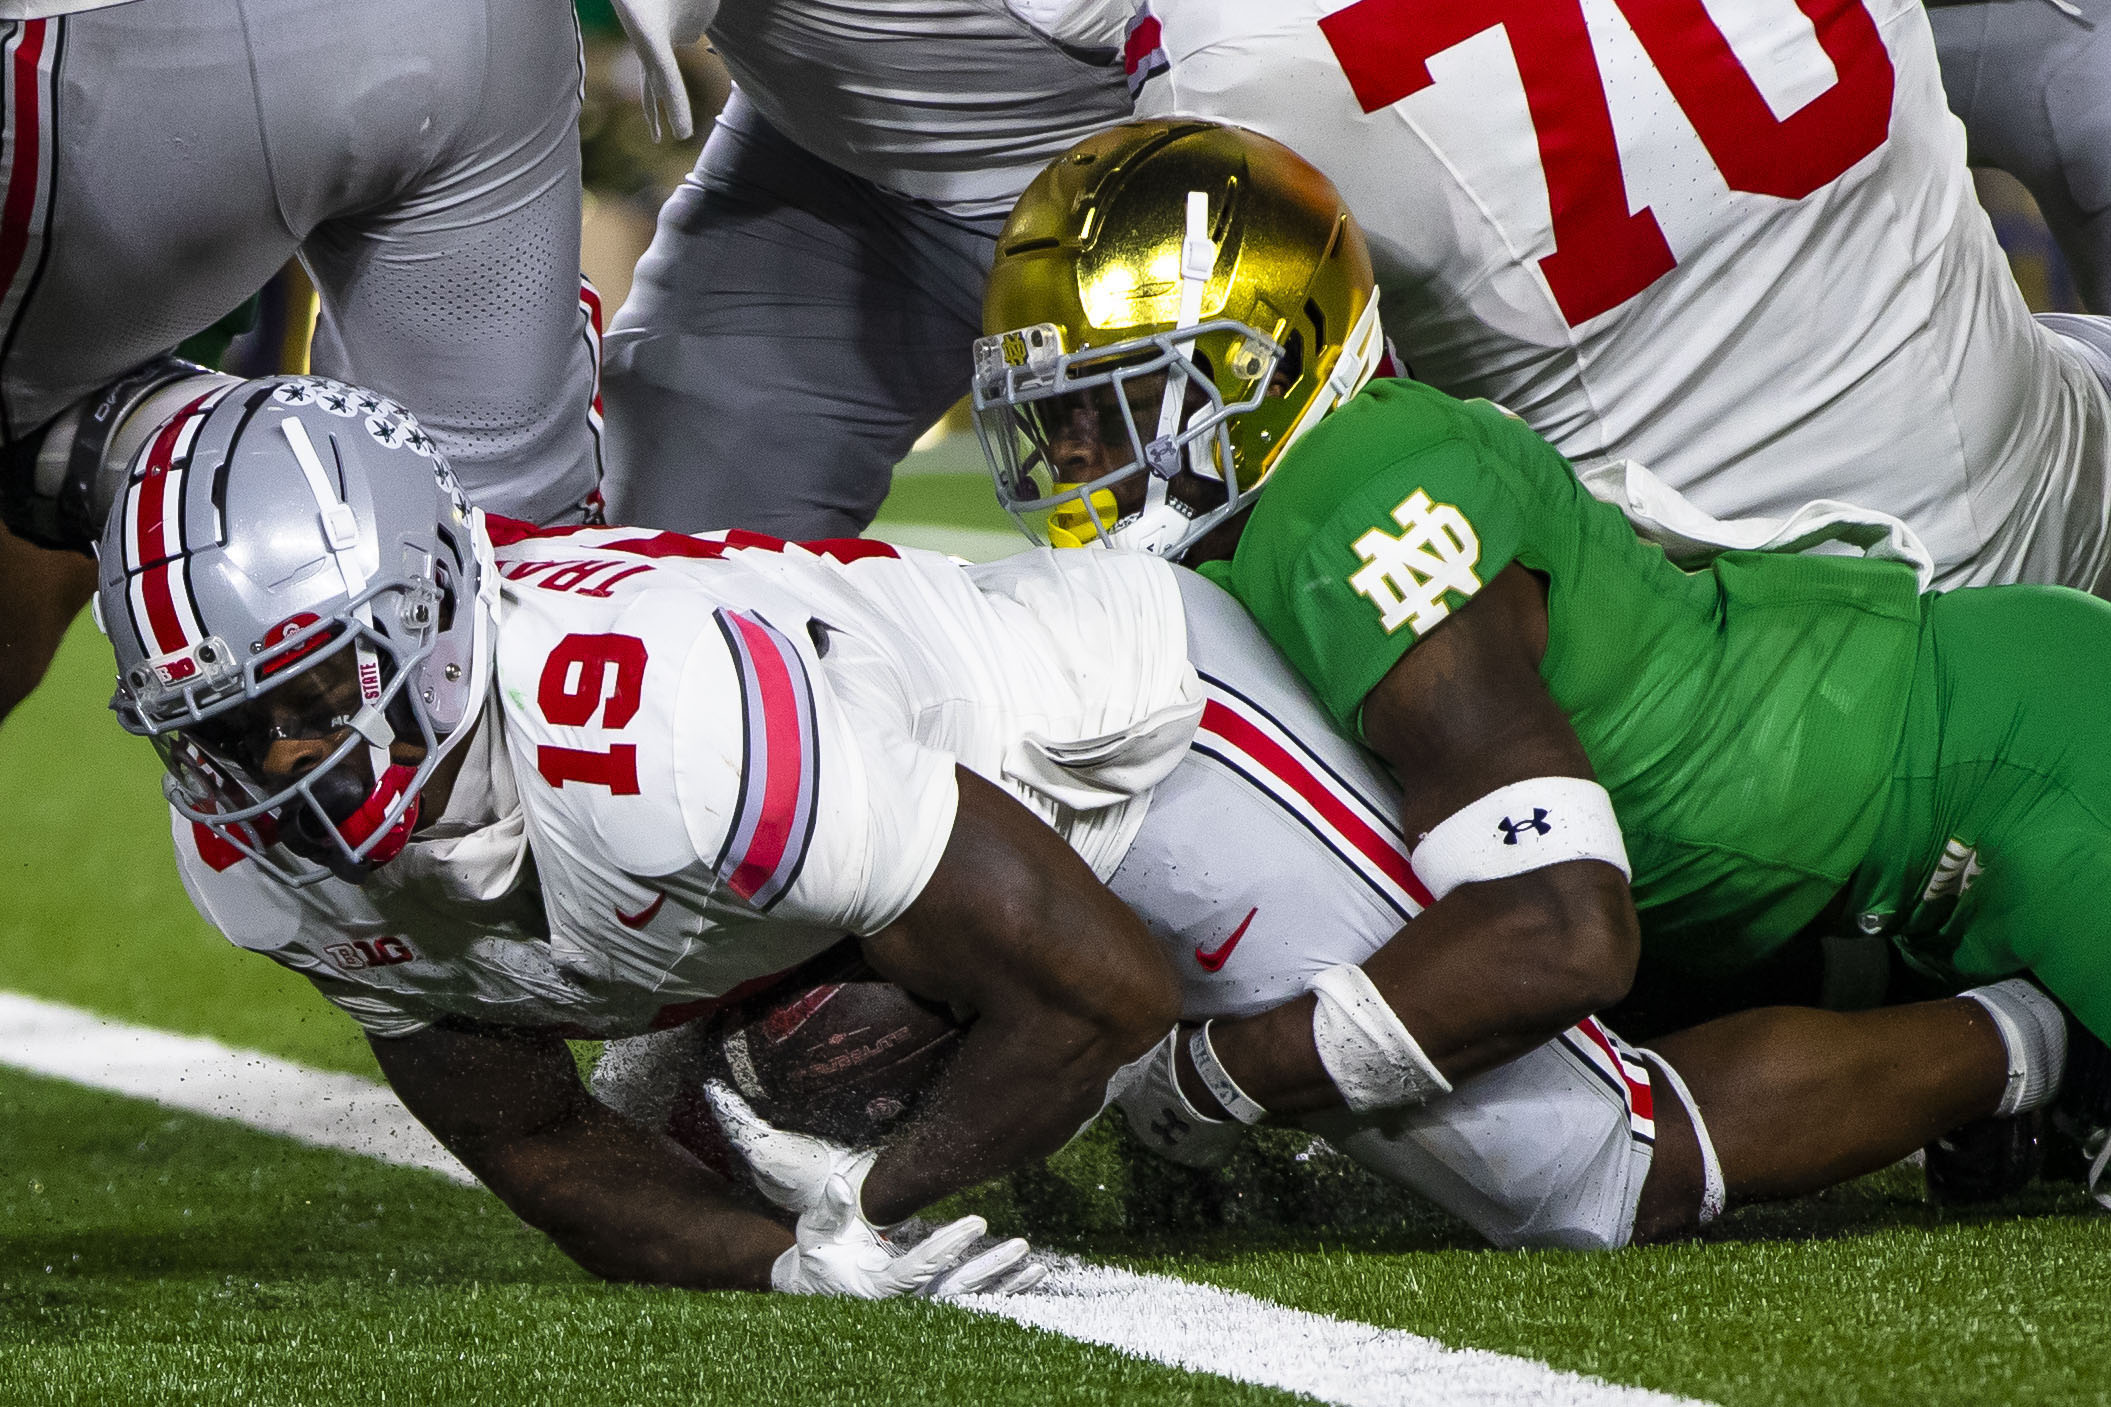 Notre Dame vs. Ohio State: A Comprehensive Guide to a Legendary College Football Rivalry